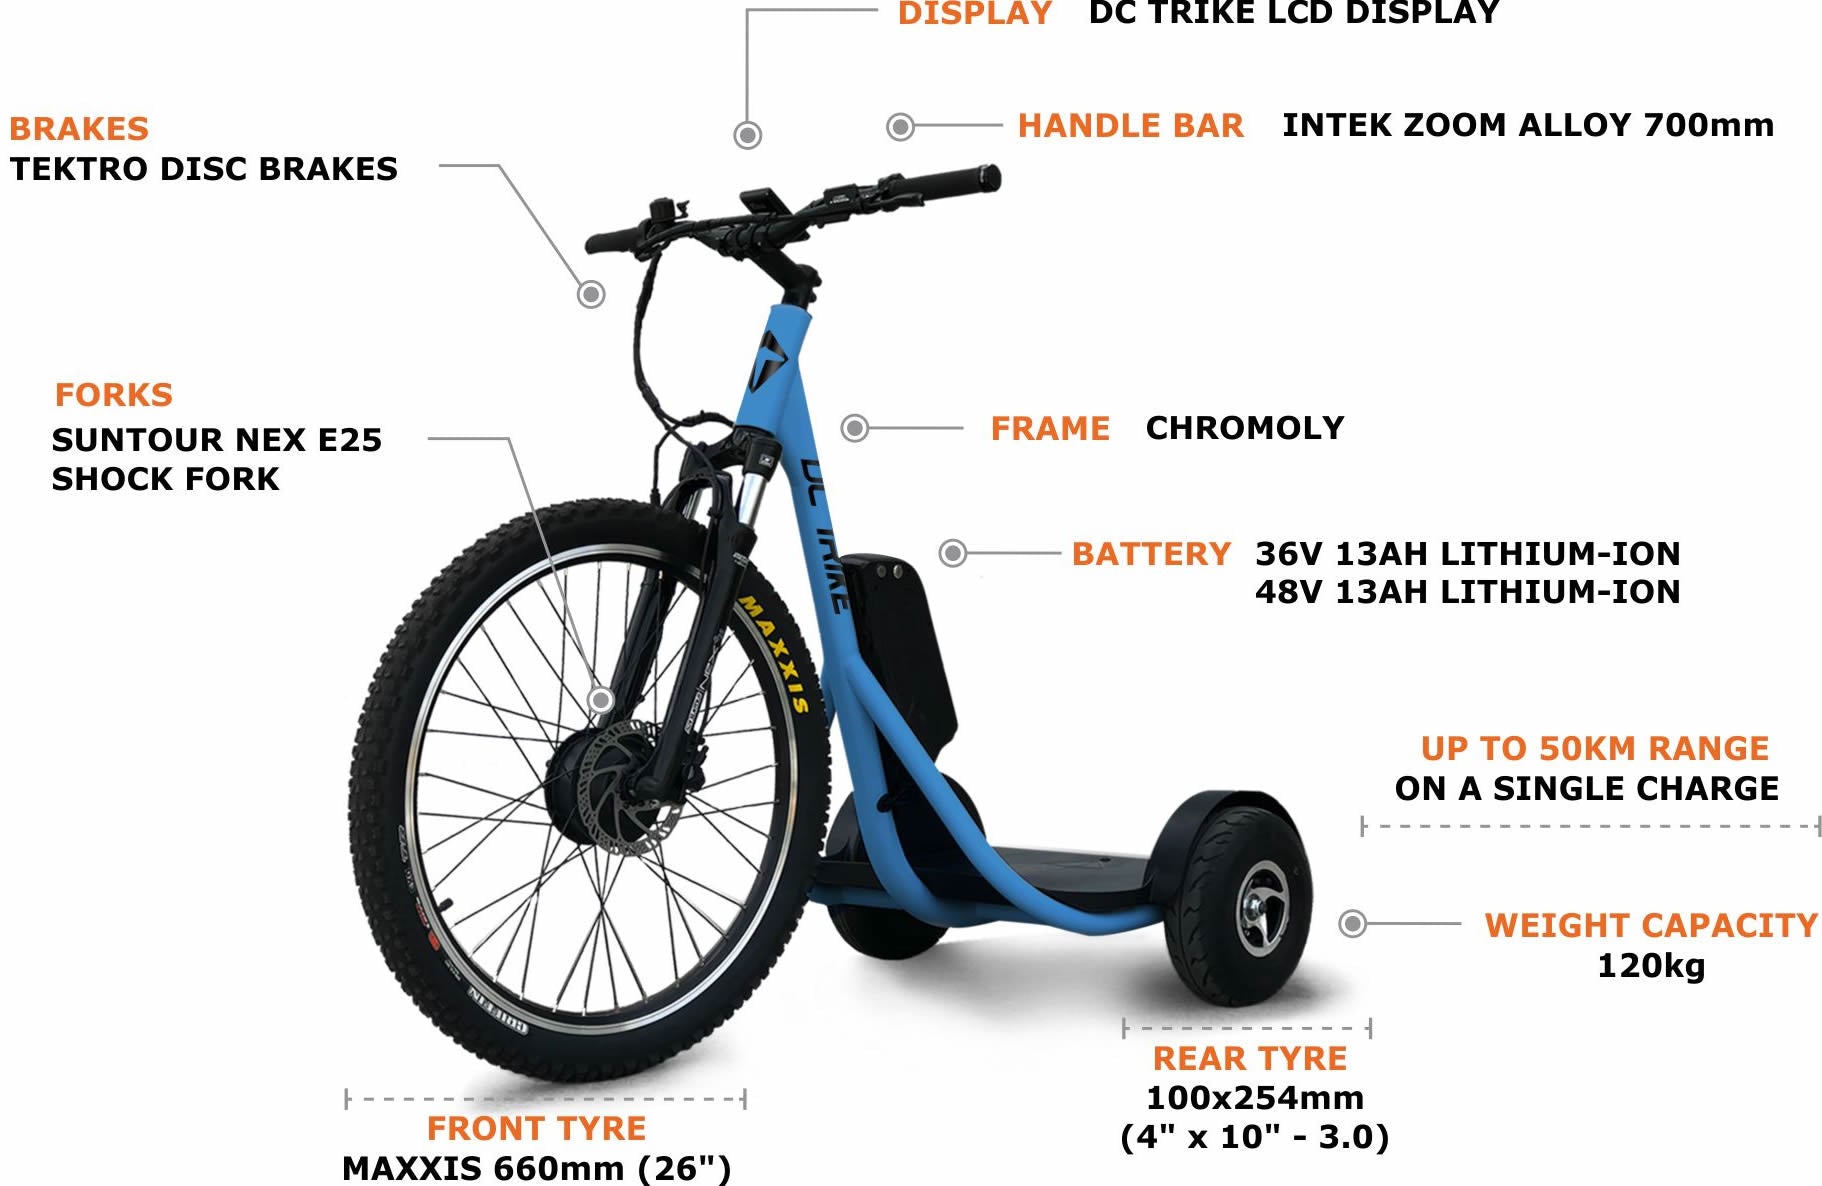 Components of a DC Trike